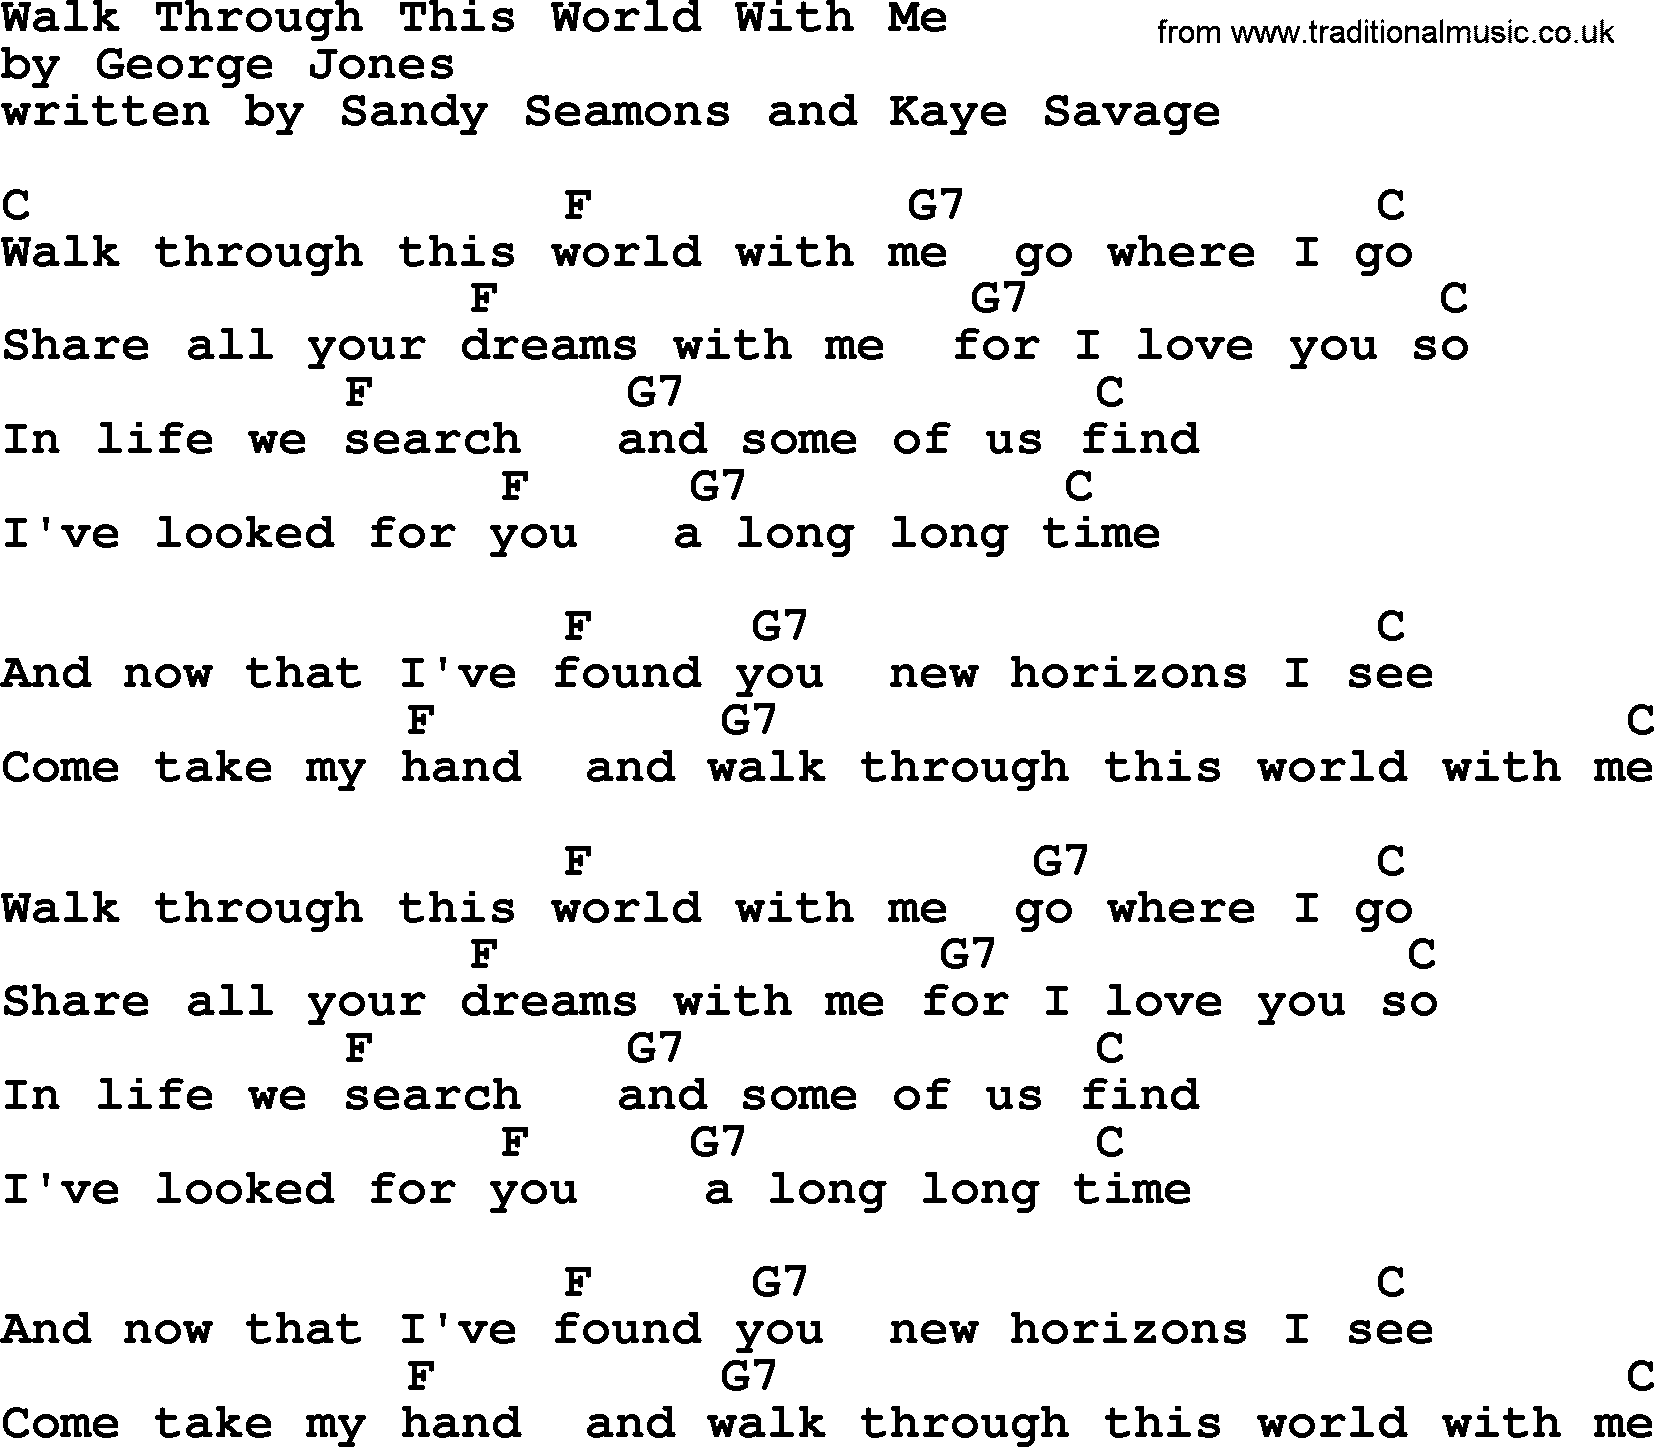 George Jones song: Walk Through This World With Me, lyrics and chords